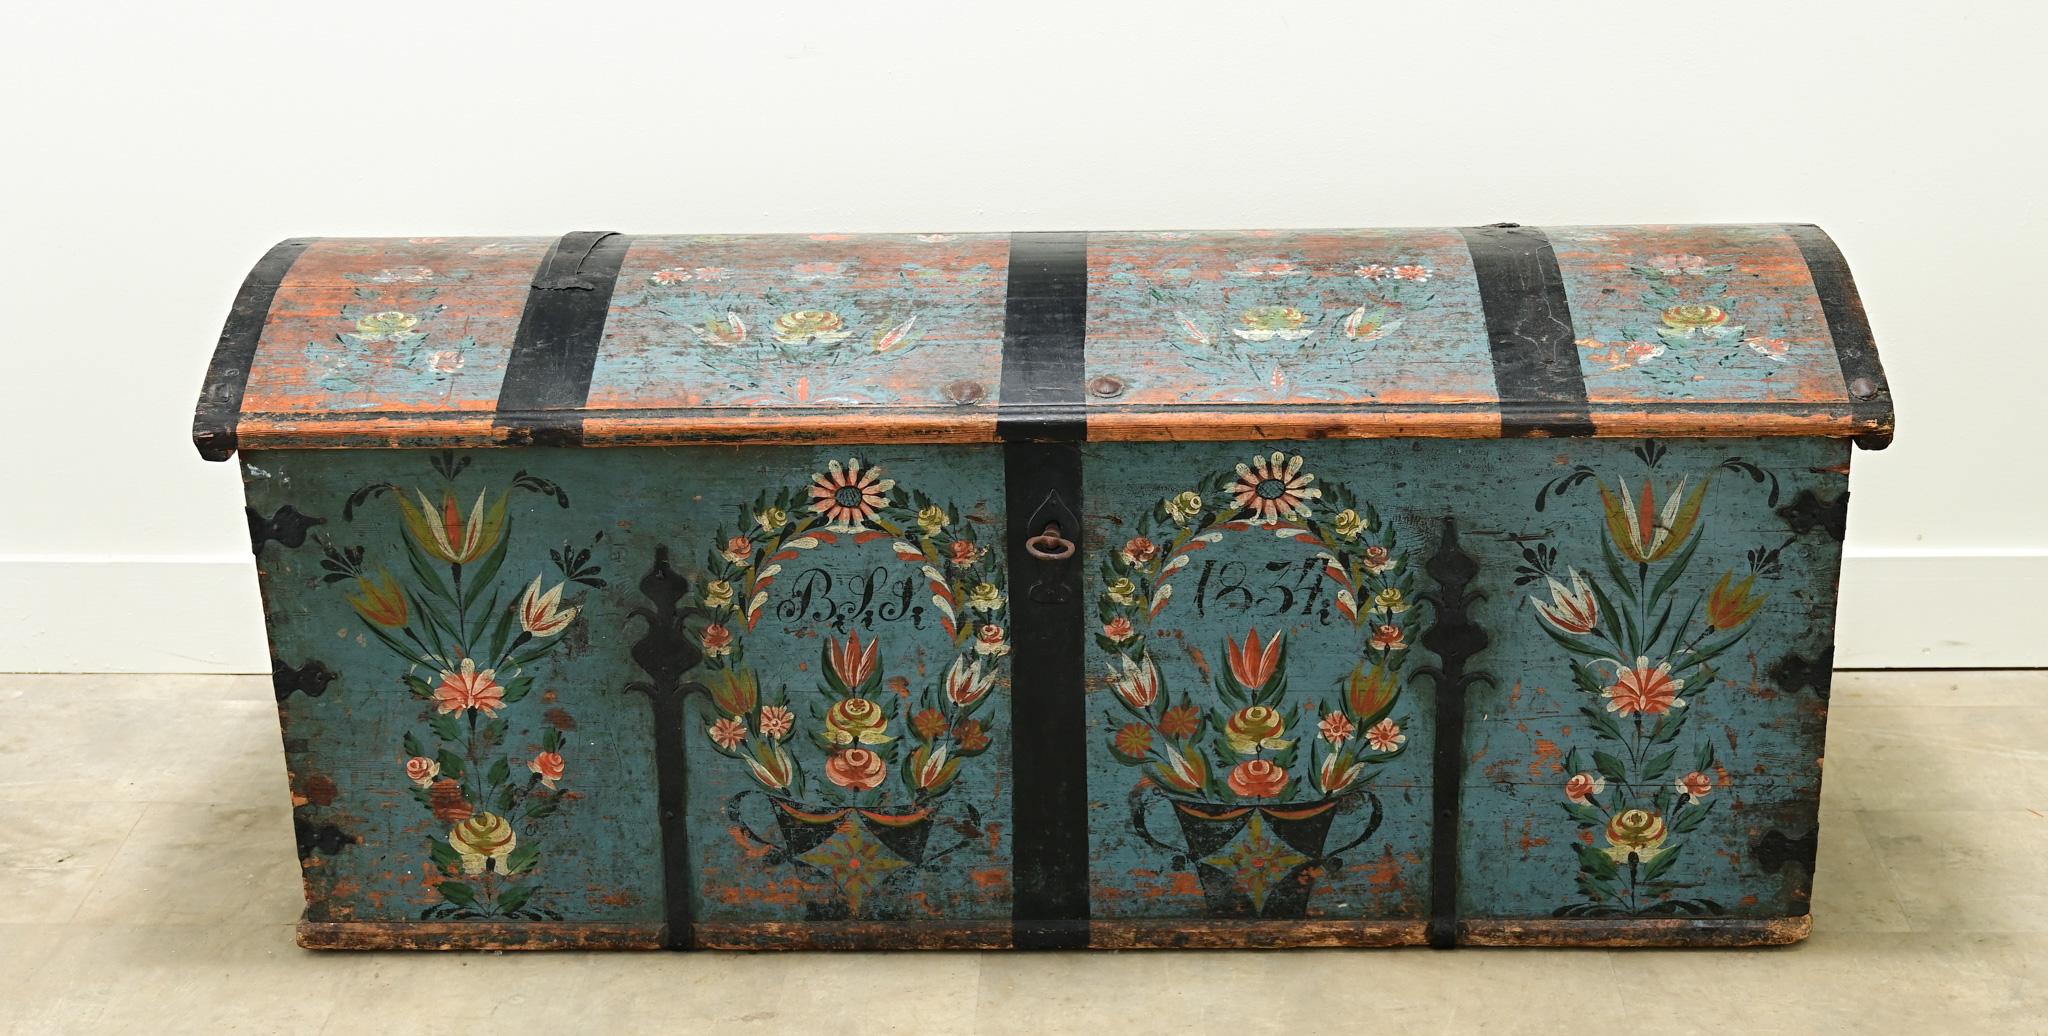 A large 19th century iron bound painted marriage trunk. The exterior of this truck is painted blue with colorful flower baskets and arrangements on its facade with the monogram, “B S S” and the date, 1834. The dommed truck top is painted with floral